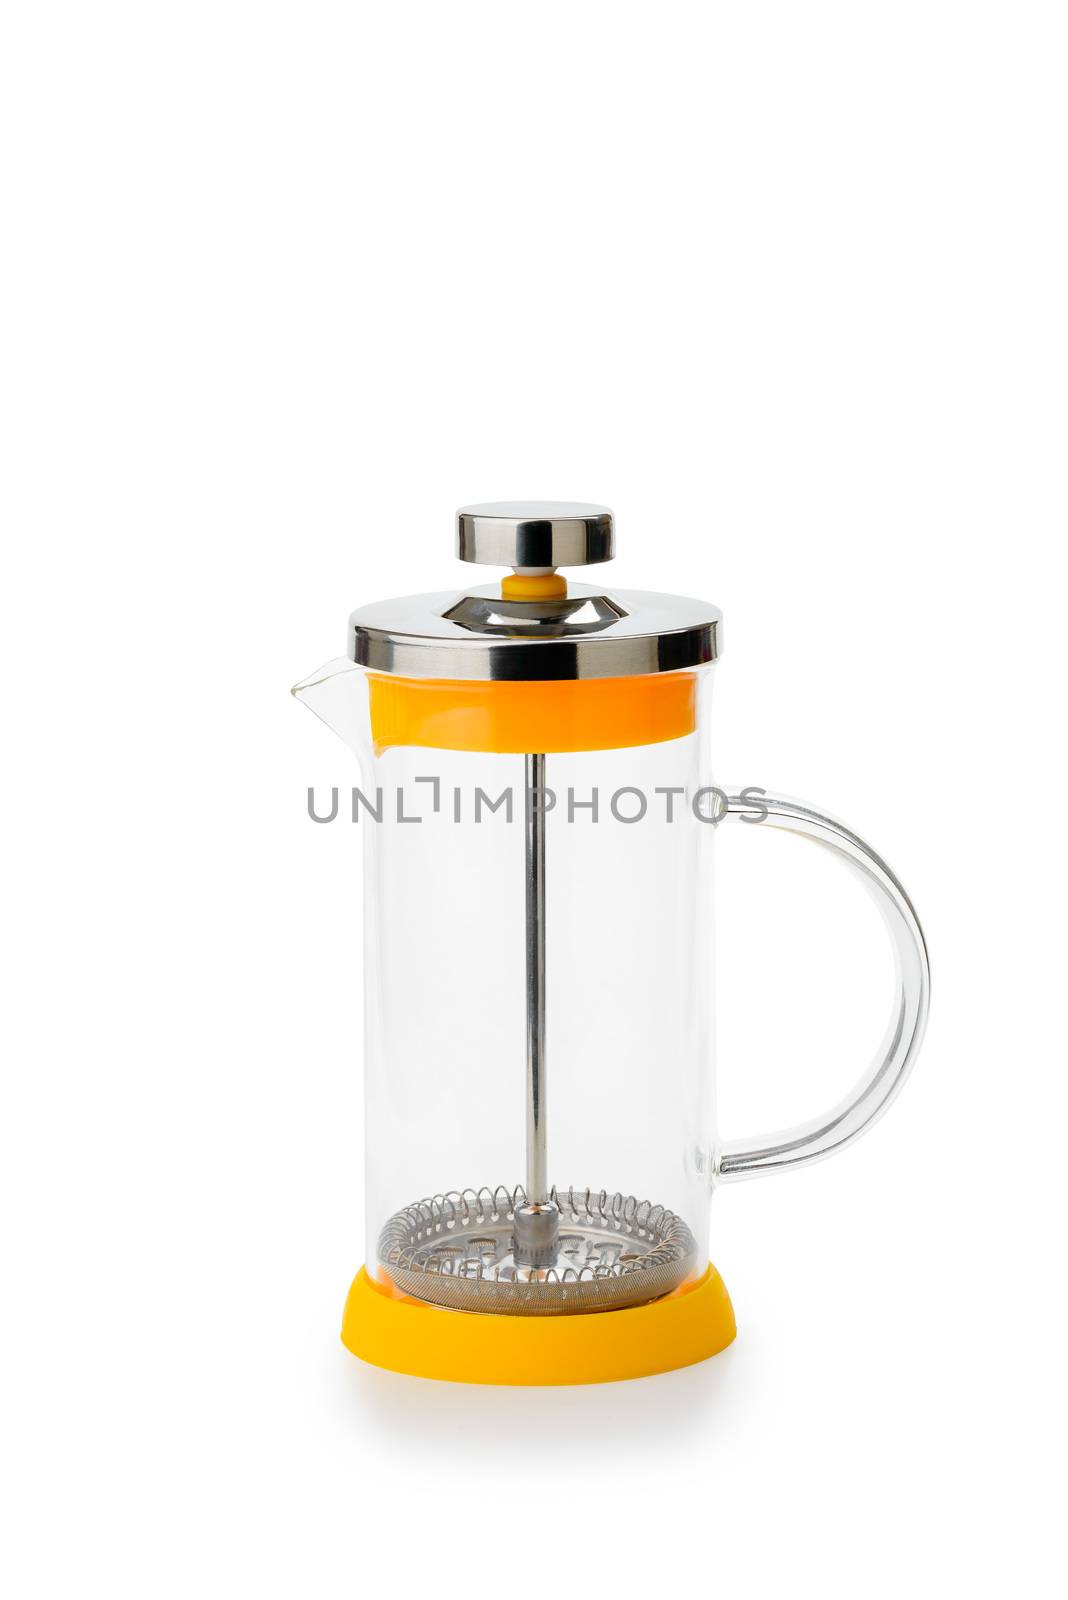 Empty glass French press for coffee and tea, isolated on white background